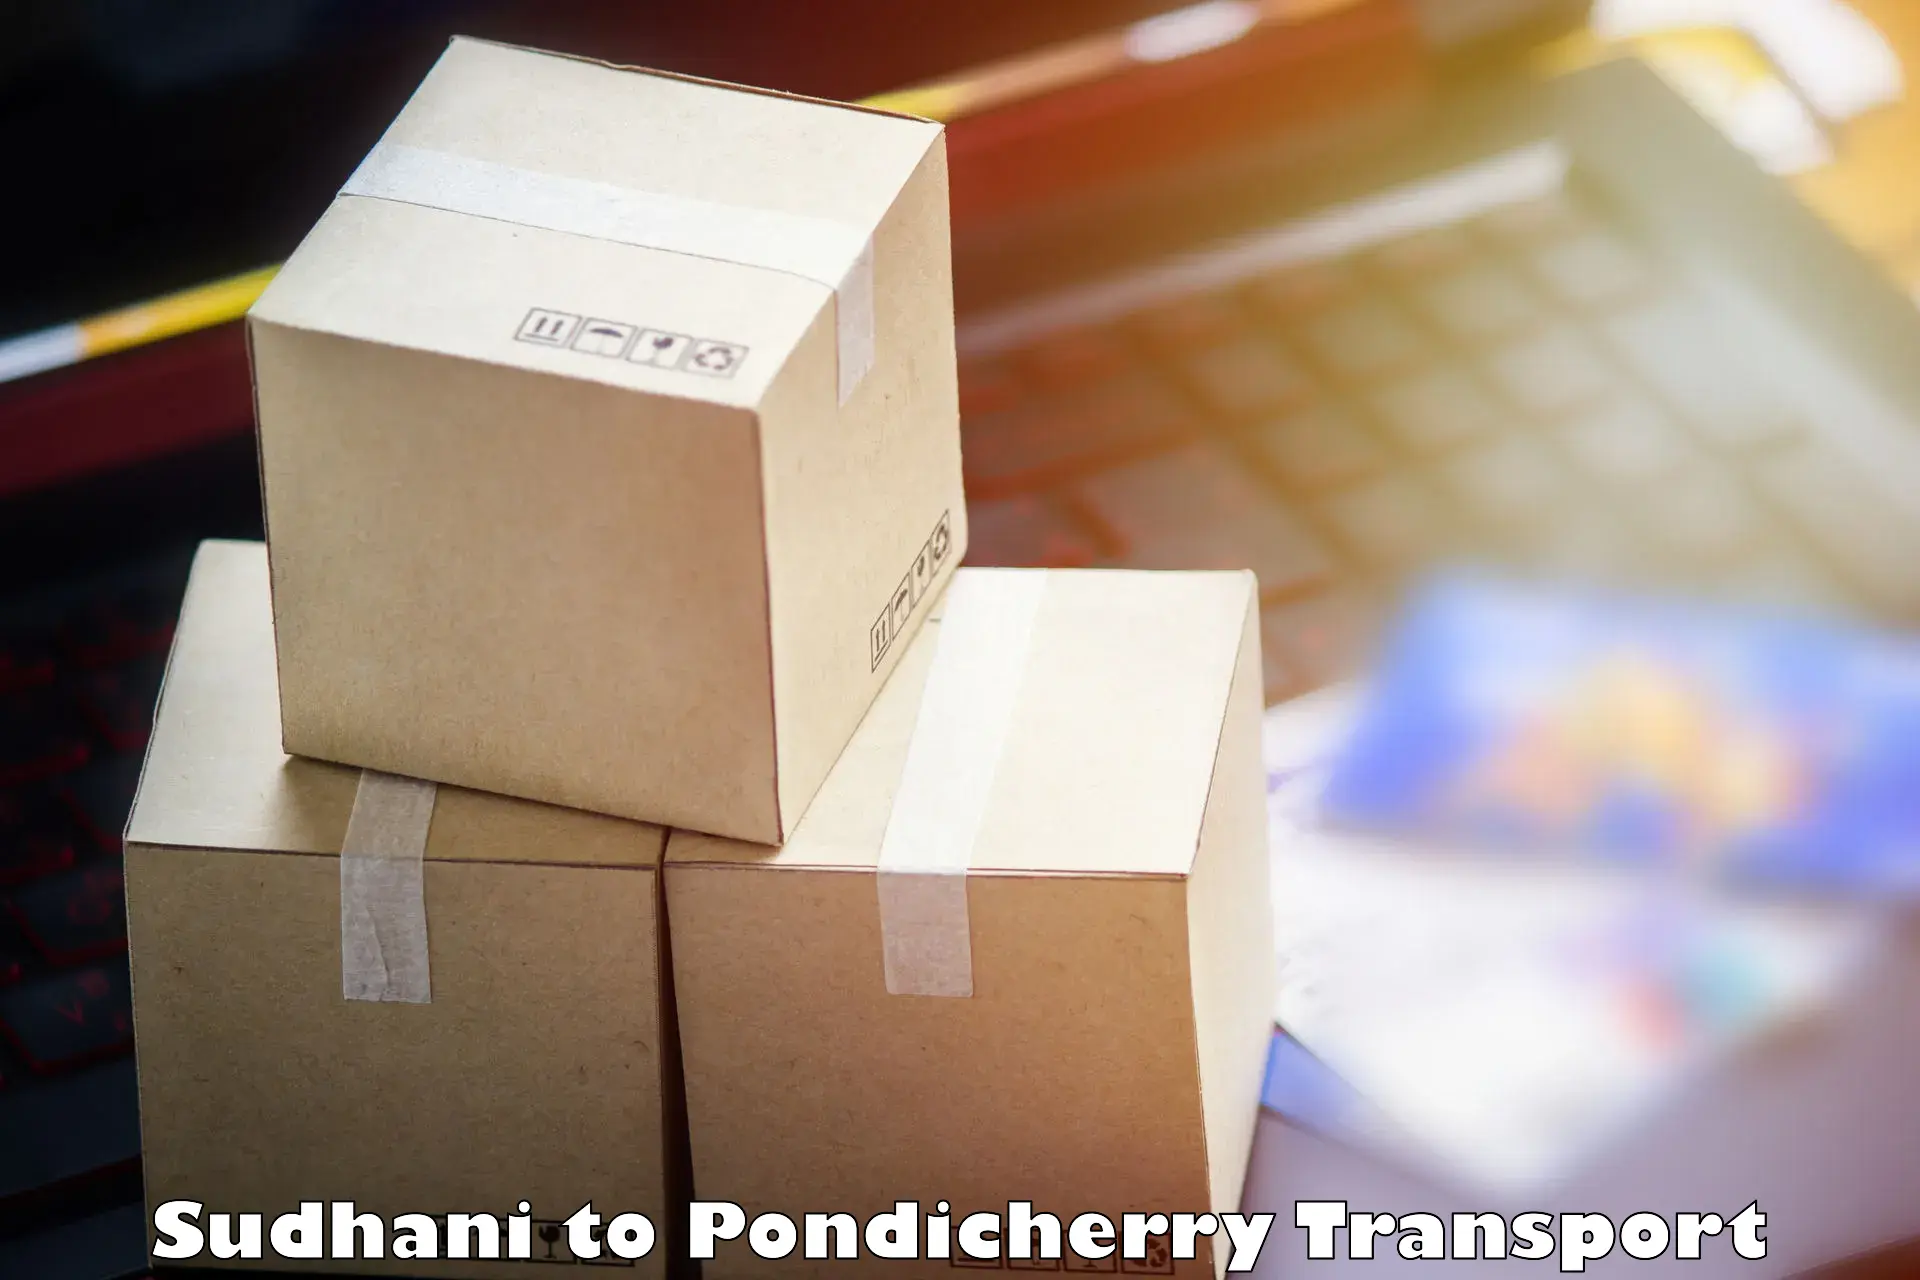 Air freight transport services Sudhani to Pondicherry